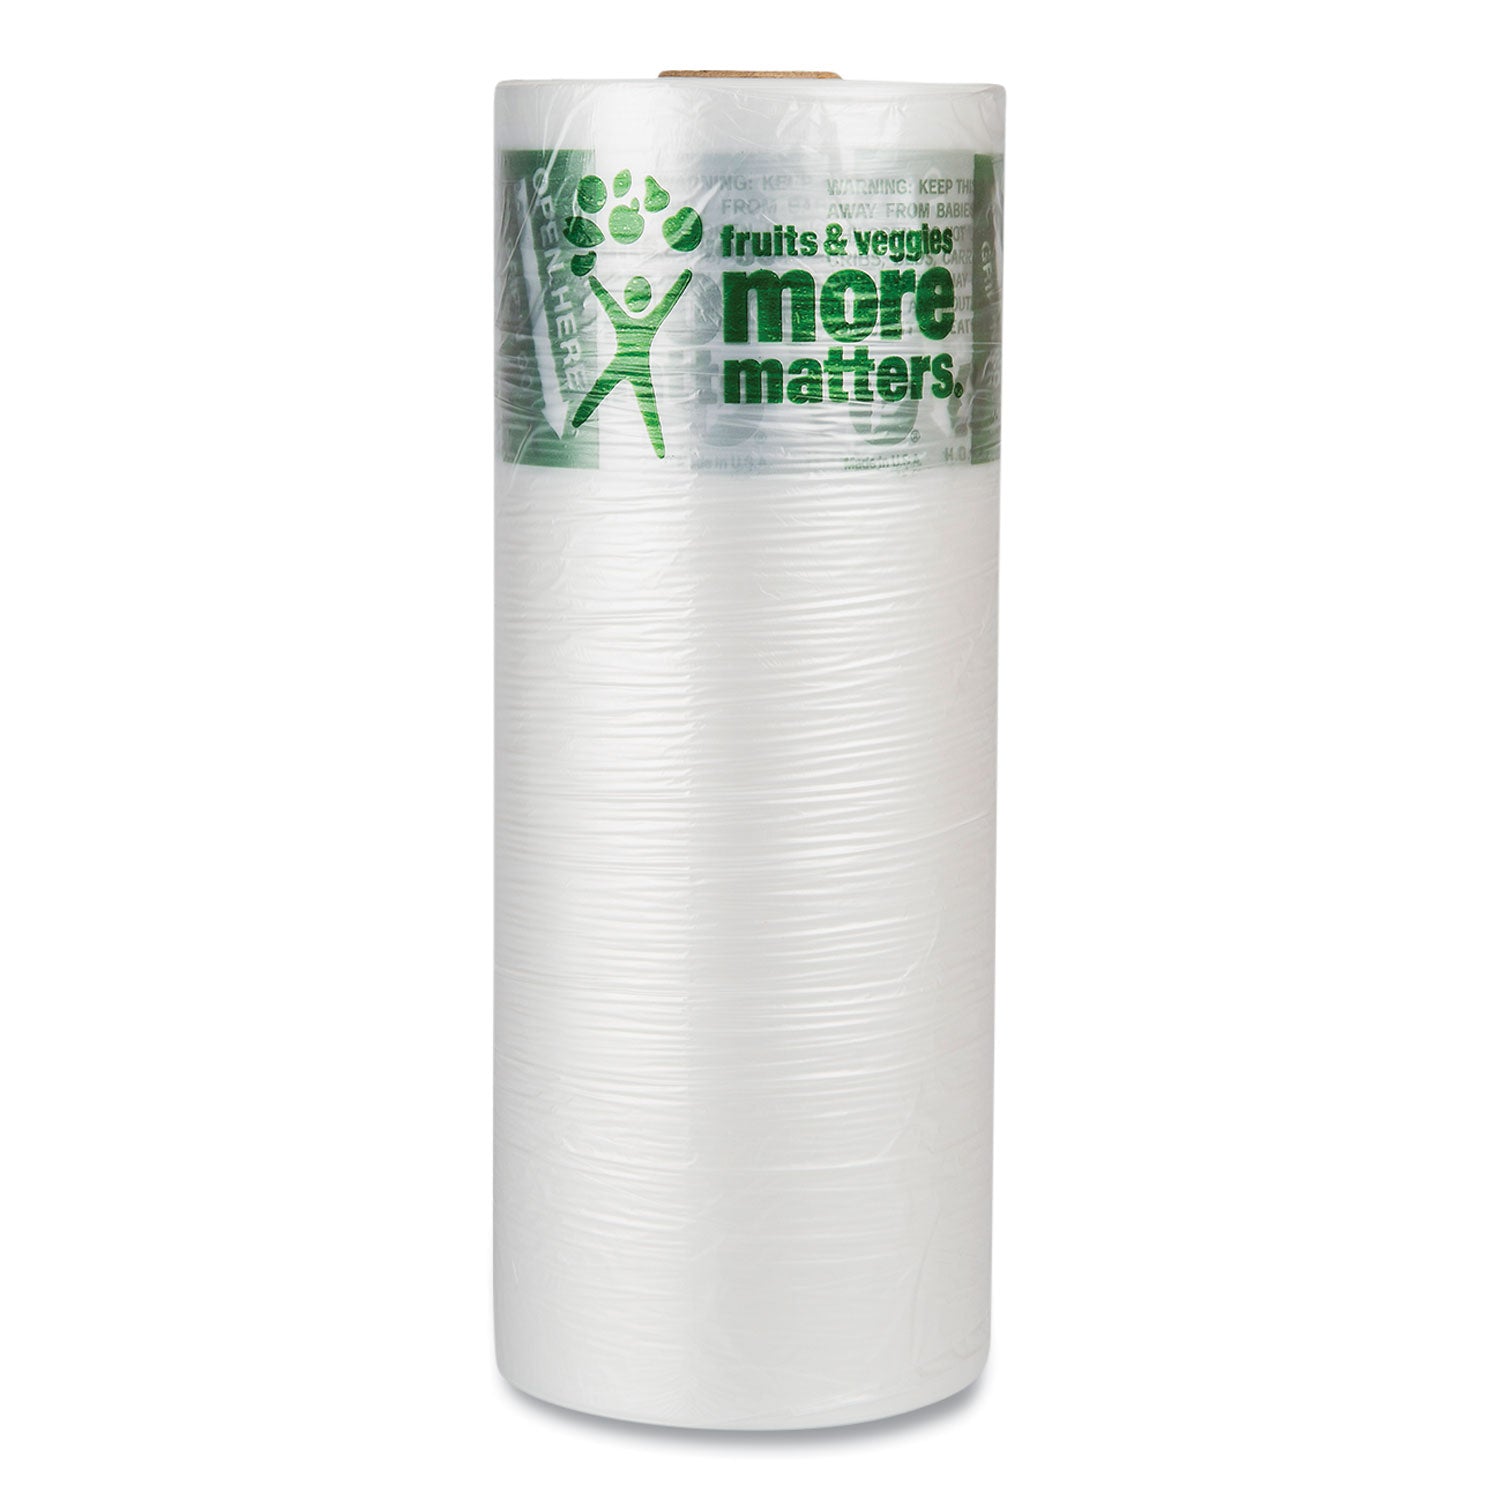 produce-bags-9-microns-12-x-20-clear-875-bags-roll-4-rolls-carton_ibsphmore20ns - 3